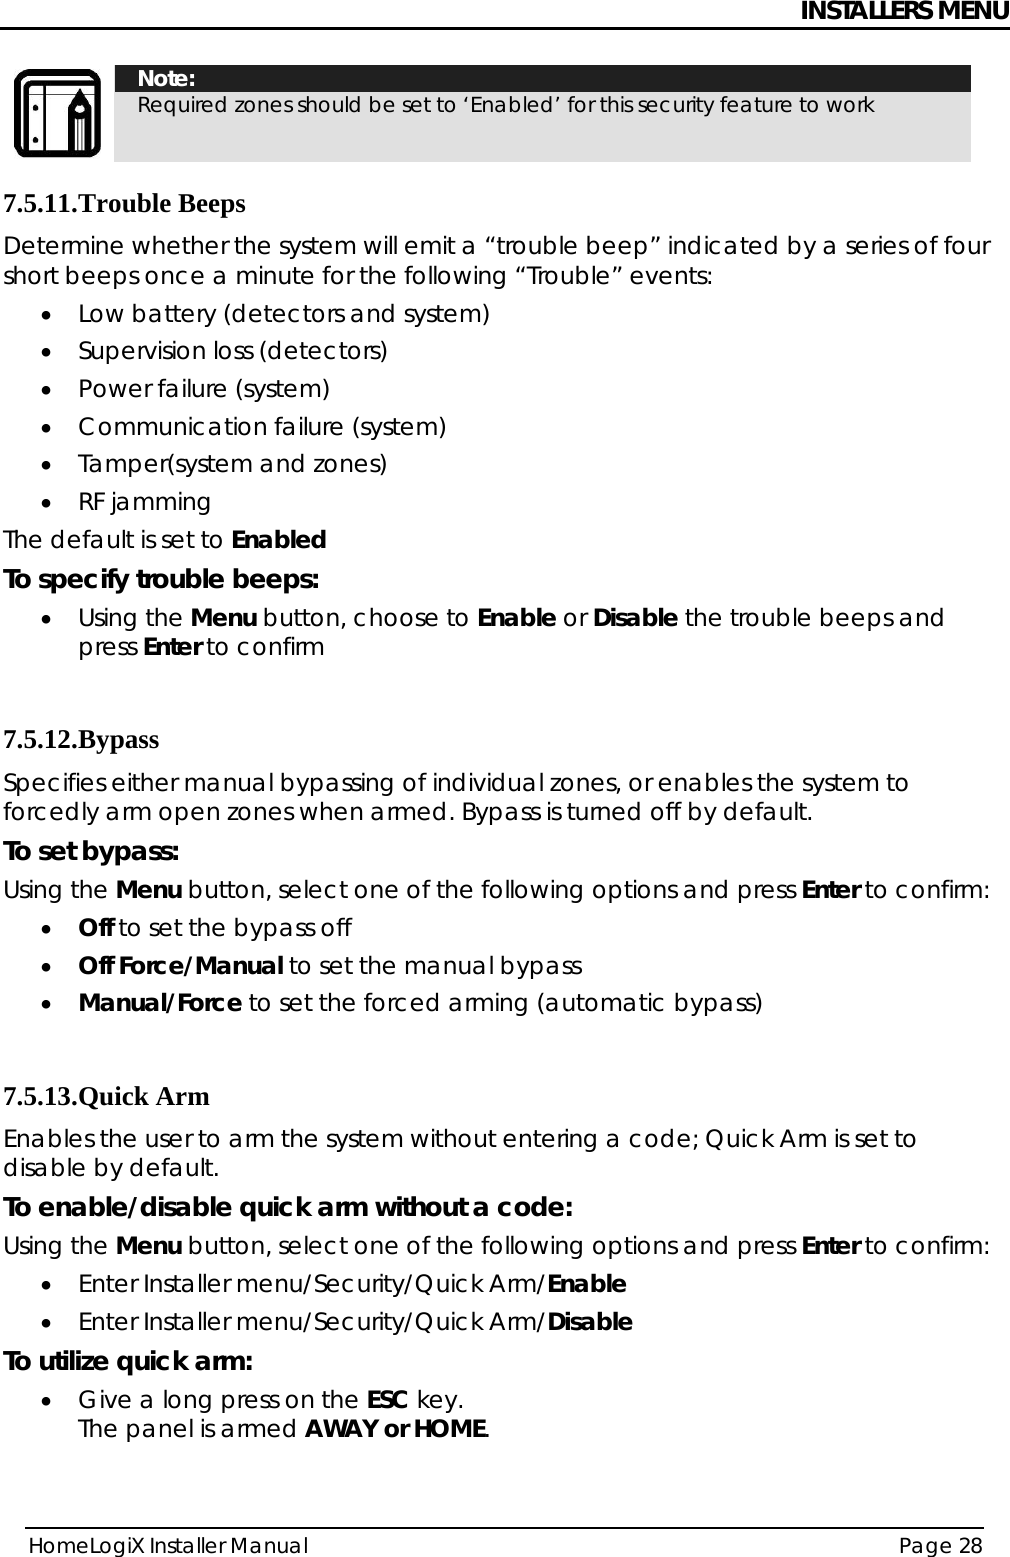 INSTALLERS MENU HomeLogiX Installer Manual  Page 28   Note: Required zones should be set to ‘Enabled’ for this security feature to work 7.5.11. Trouble Beeps Determine whether the system will emit a “trouble beep” indicated by a series of four short beeps once a minute for the following “Trouble” events: • Low battery (detectors and system) • Supervision loss (detectors) • Power failure (system) • Communication failure (system) • Tamper(system and zones) • RF jamming  The default is set to Enabled To specify trouble beeps: • Using the Menu button, choose to Enable or Disable the trouble beeps and press Enter to confirm  7.5.12. Bypass Specifies either manual bypassing of individual zones, or enables the system to forcedly arm open zones when armed. Bypass is turned off by default. To set bypass: Using the Menu button, select one of the following options and press Enter to confirm: • Off to set the bypass off • Off Force/Manual to set the manual bypass • Manual/Force to set the forced arming (automatic bypass)  7.5.13. Quick Arm Enables the user to arm the system without entering a code; Quick Arm is set to disable by default. To enable/disable quick arm without a code: Using the Menu button, select one of the following options and press Enter to confirm: • Enter Installer menu/Security/Quick Arm/Enable   • Enter Installer menu/Security/Quick Arm/Disable To utilize quick arm: • Give a long press on the ESC key. The panel is armed AWAY or HOME. 